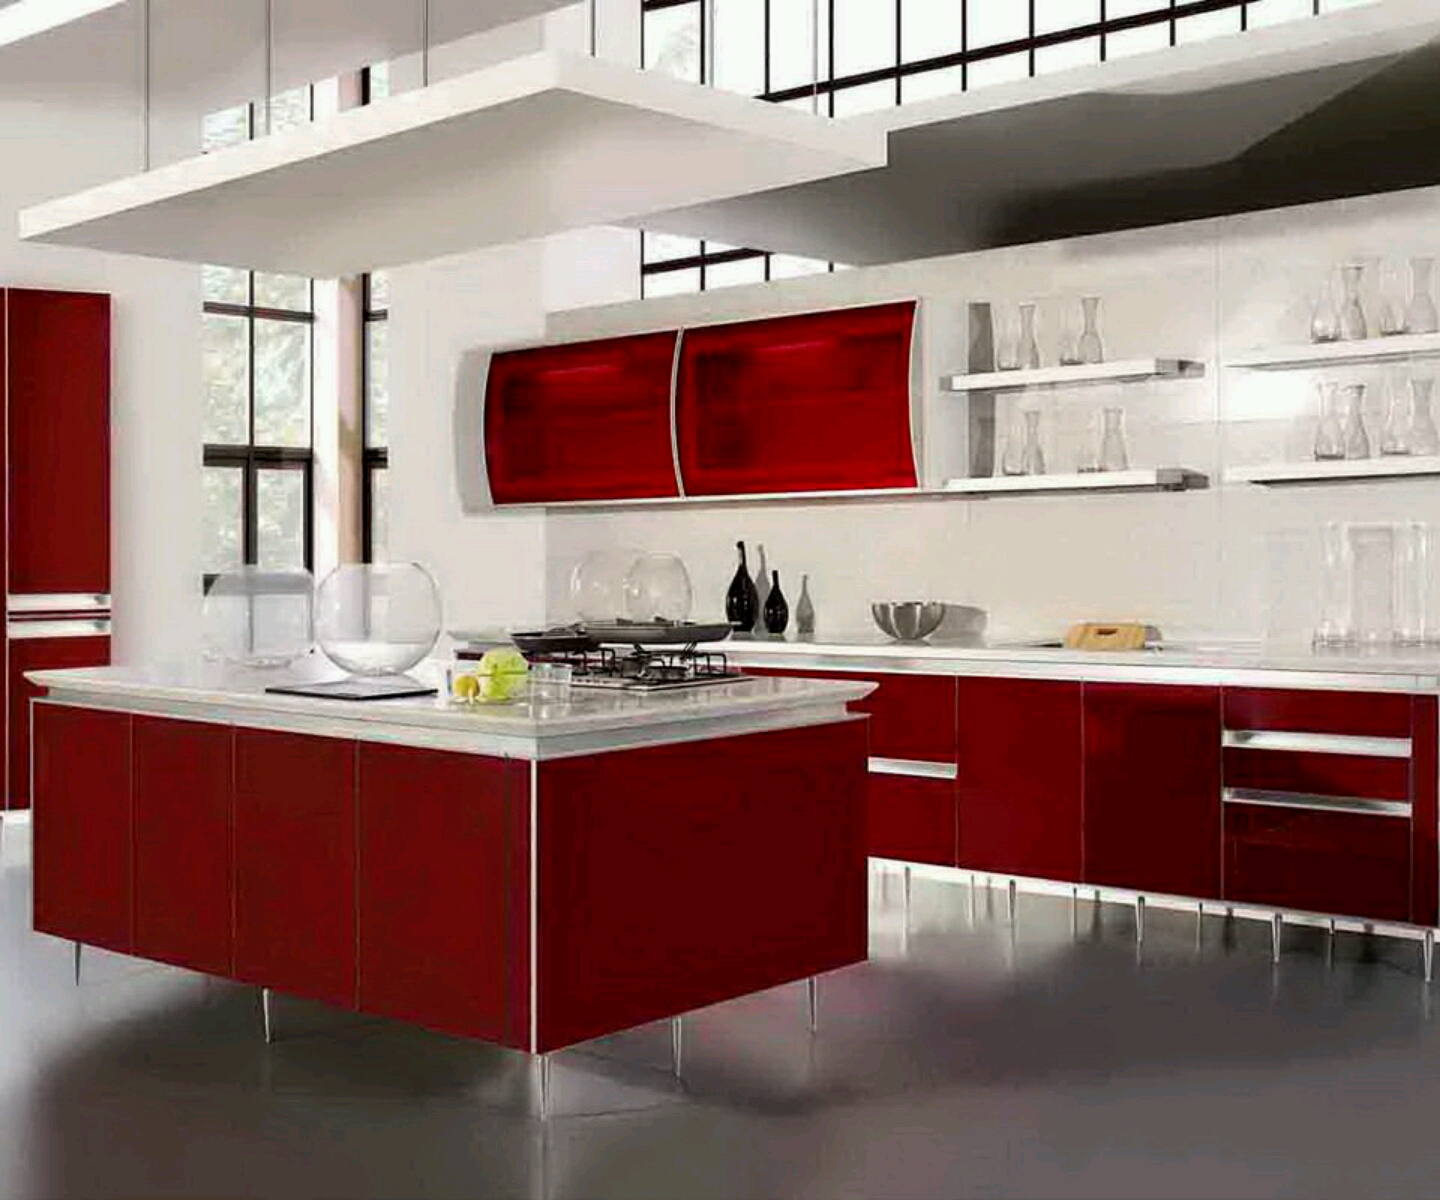 Cheap Kitchen Ideas For Small Kitchens